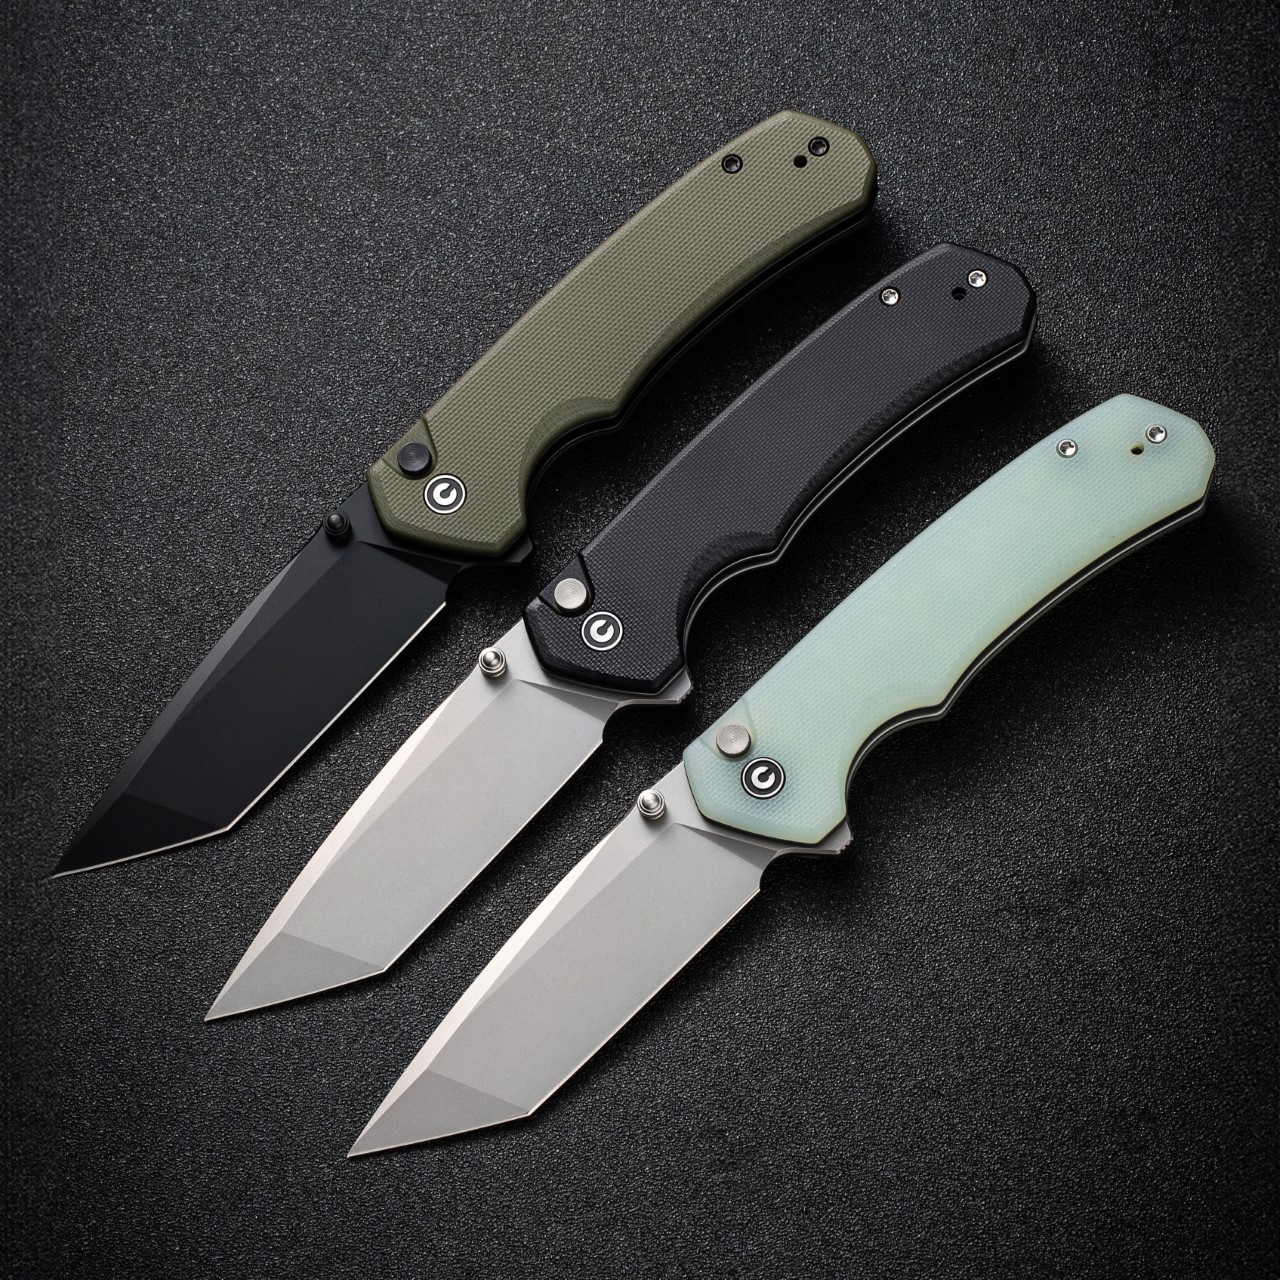 https://www.yankodesign.com/images/design_news/2023/12/top-10-edc-knives-to-gift-by-civivi-to-enhance-your-outdoor-adventures/CIVIVI_weknife_Gifts_EDC-Knives_9.jpg